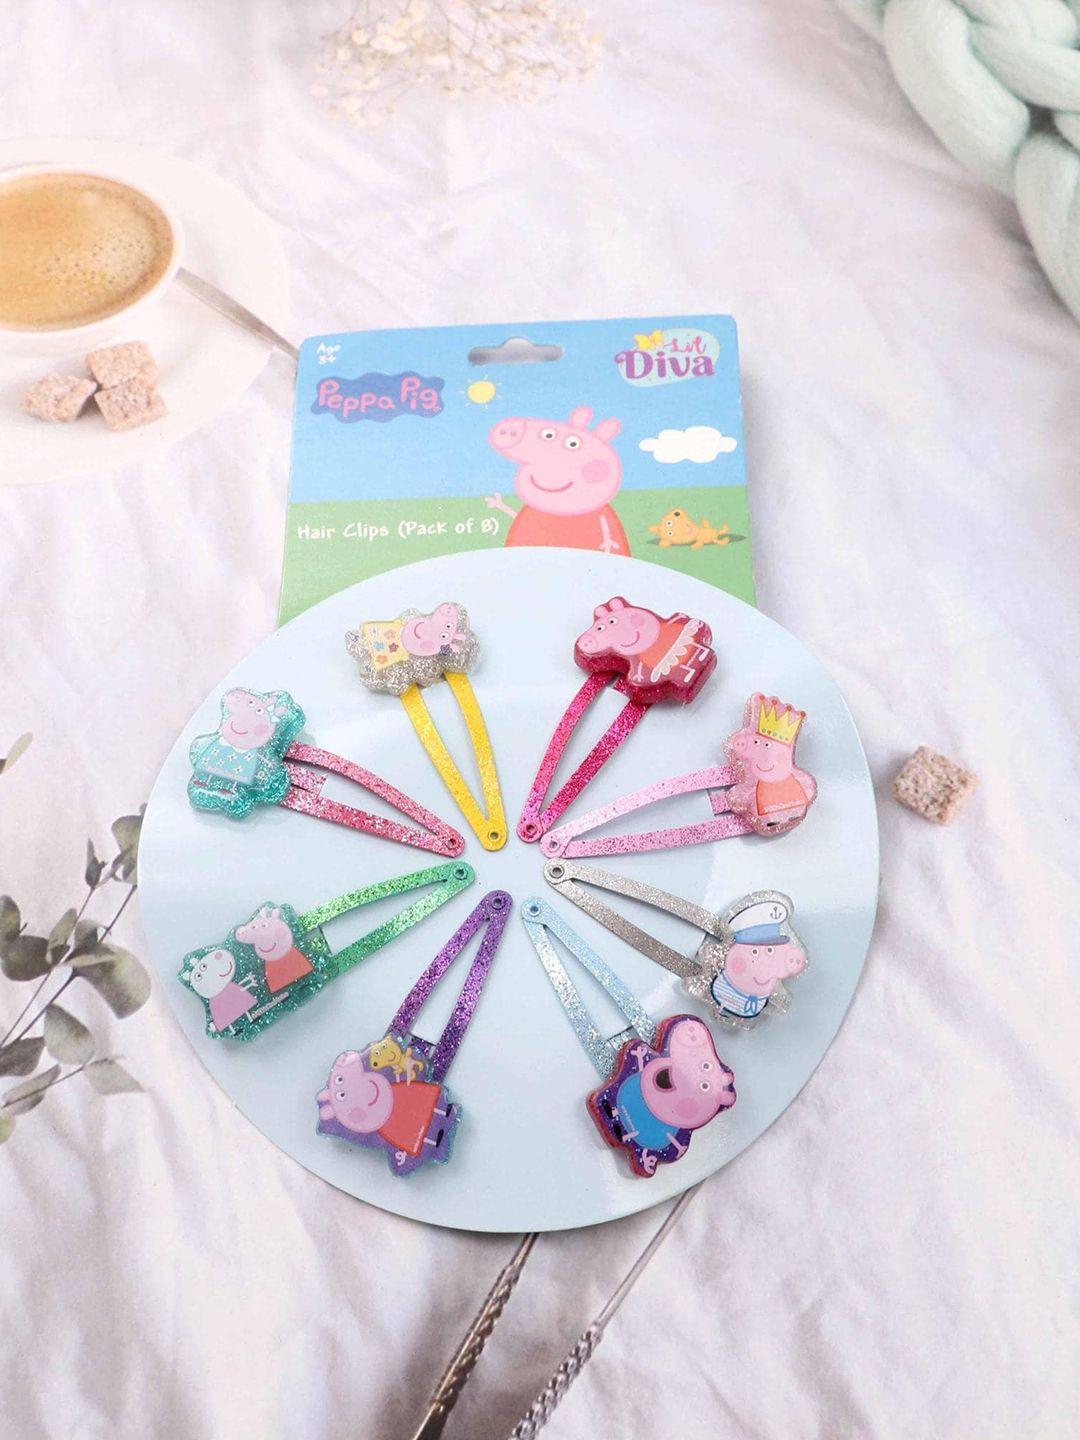 lil diva set of 8 peppa pig hair clips